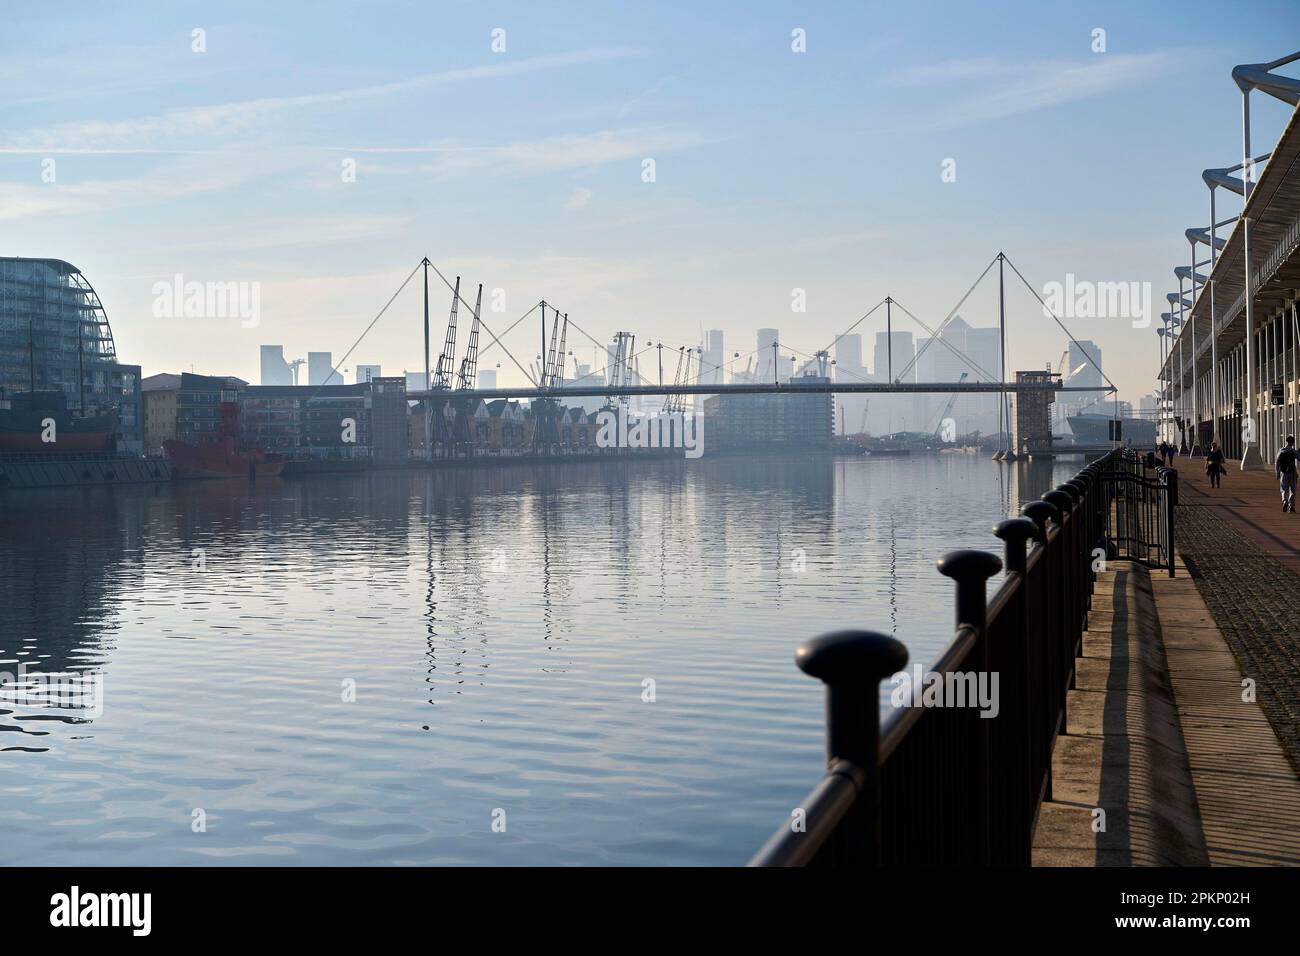 Royal Victoria Dock, Docklands high rise buildings in the background, East end of London, UK Stock Photo